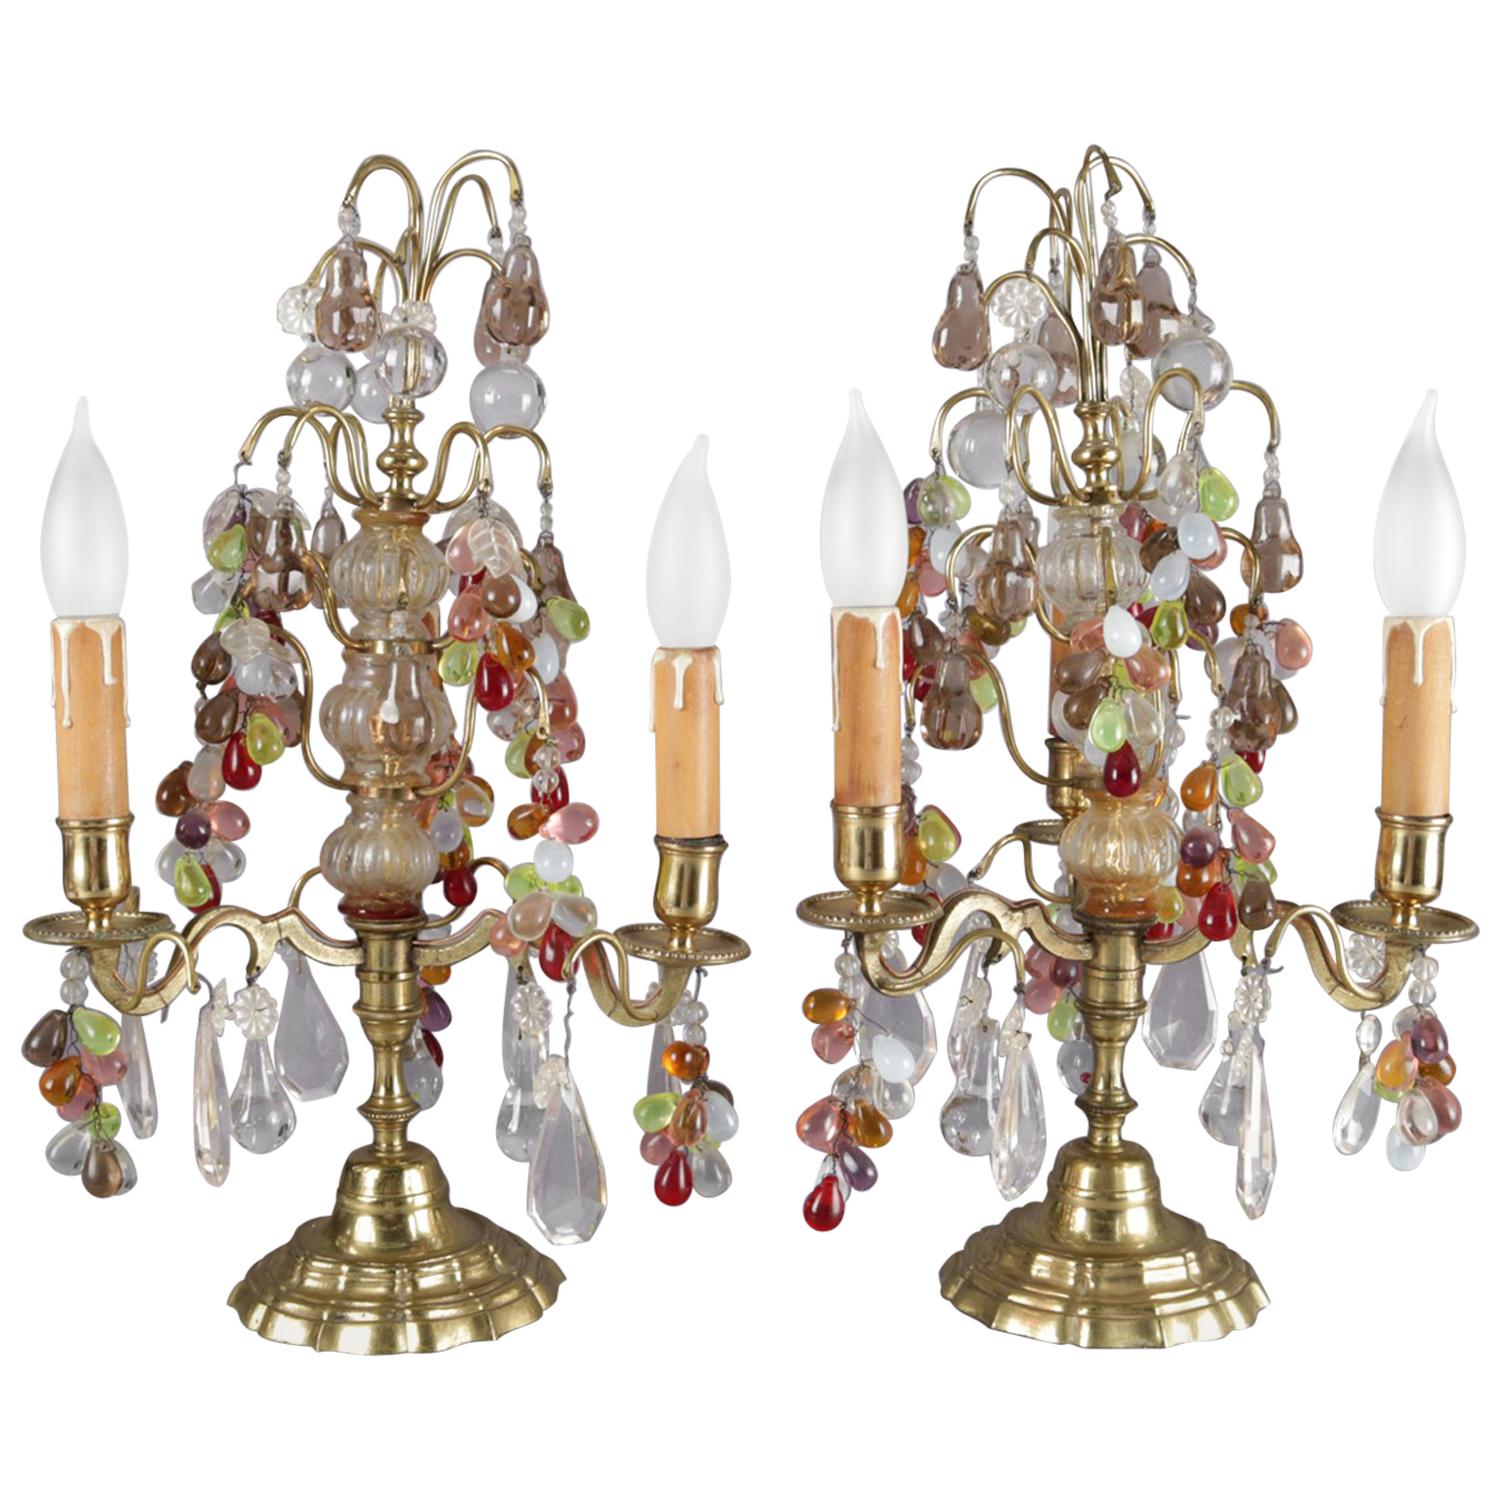 Antique Pair of Bronze and Crystal Prism Fruit Candelabra Lamps, Grape and Leaf